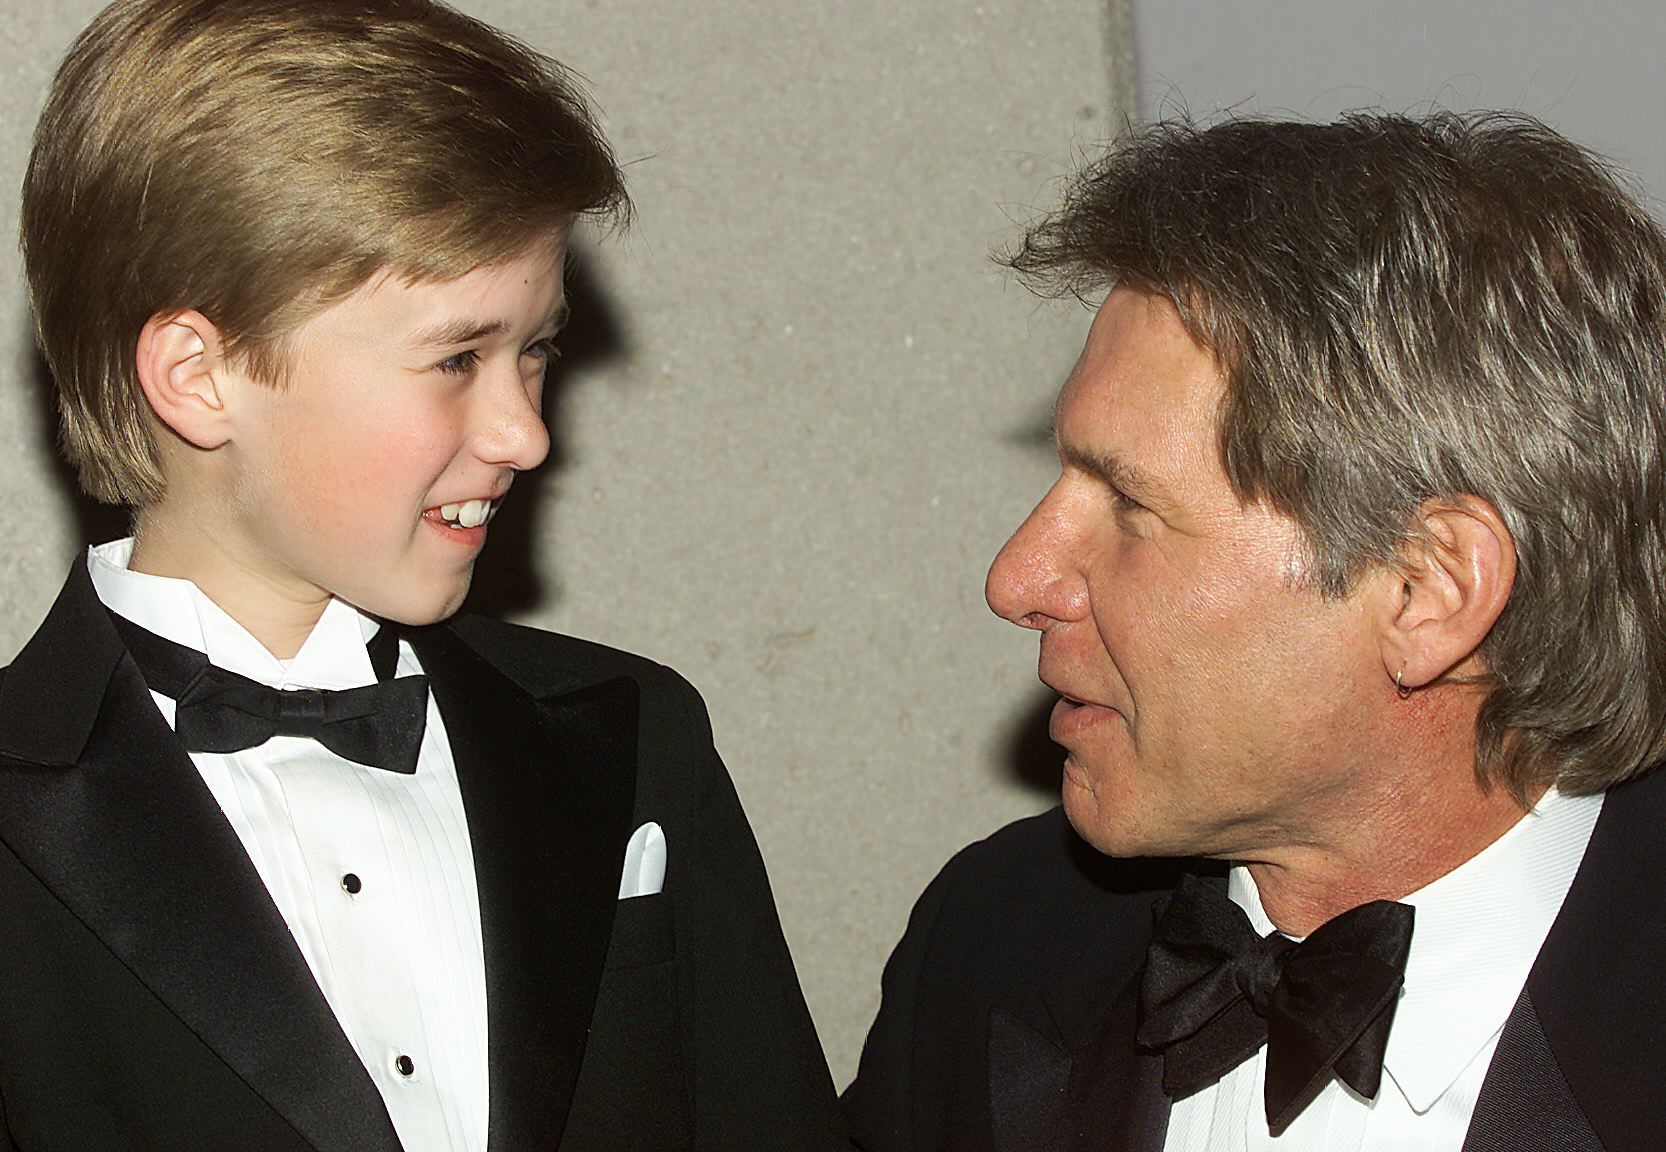 Hayley Joel Osment and Harrison Ford backstage at the 26th People's Choice Awards on January 9, 2000 in Pasadena, California. | Source: Getty Images